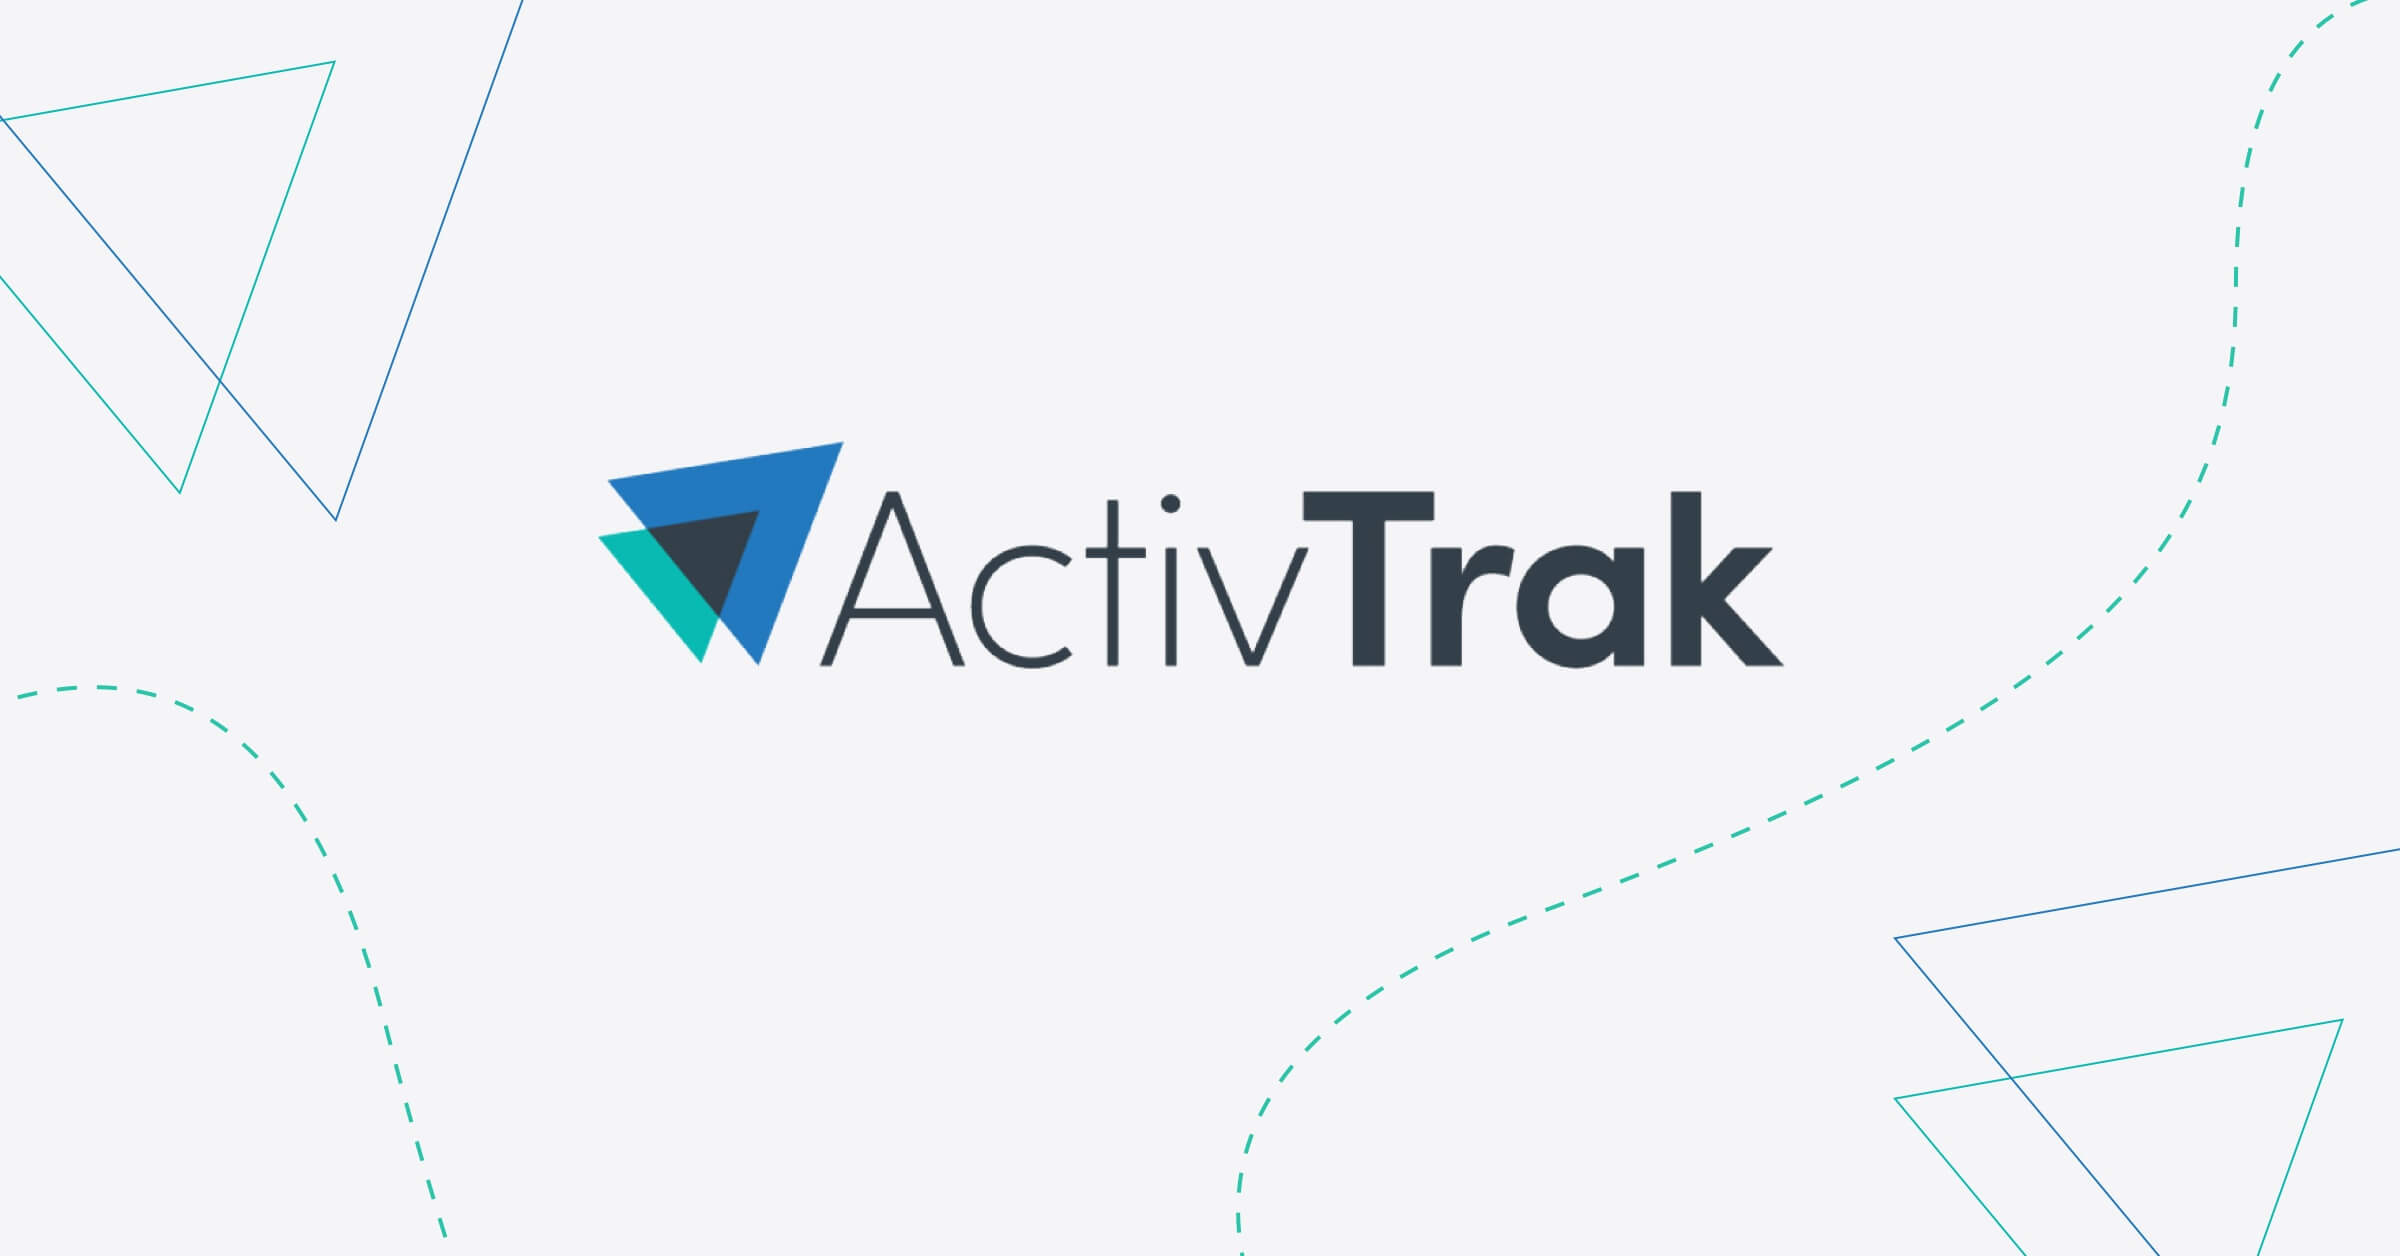 ActivTrak becomes remote-first with Happeo